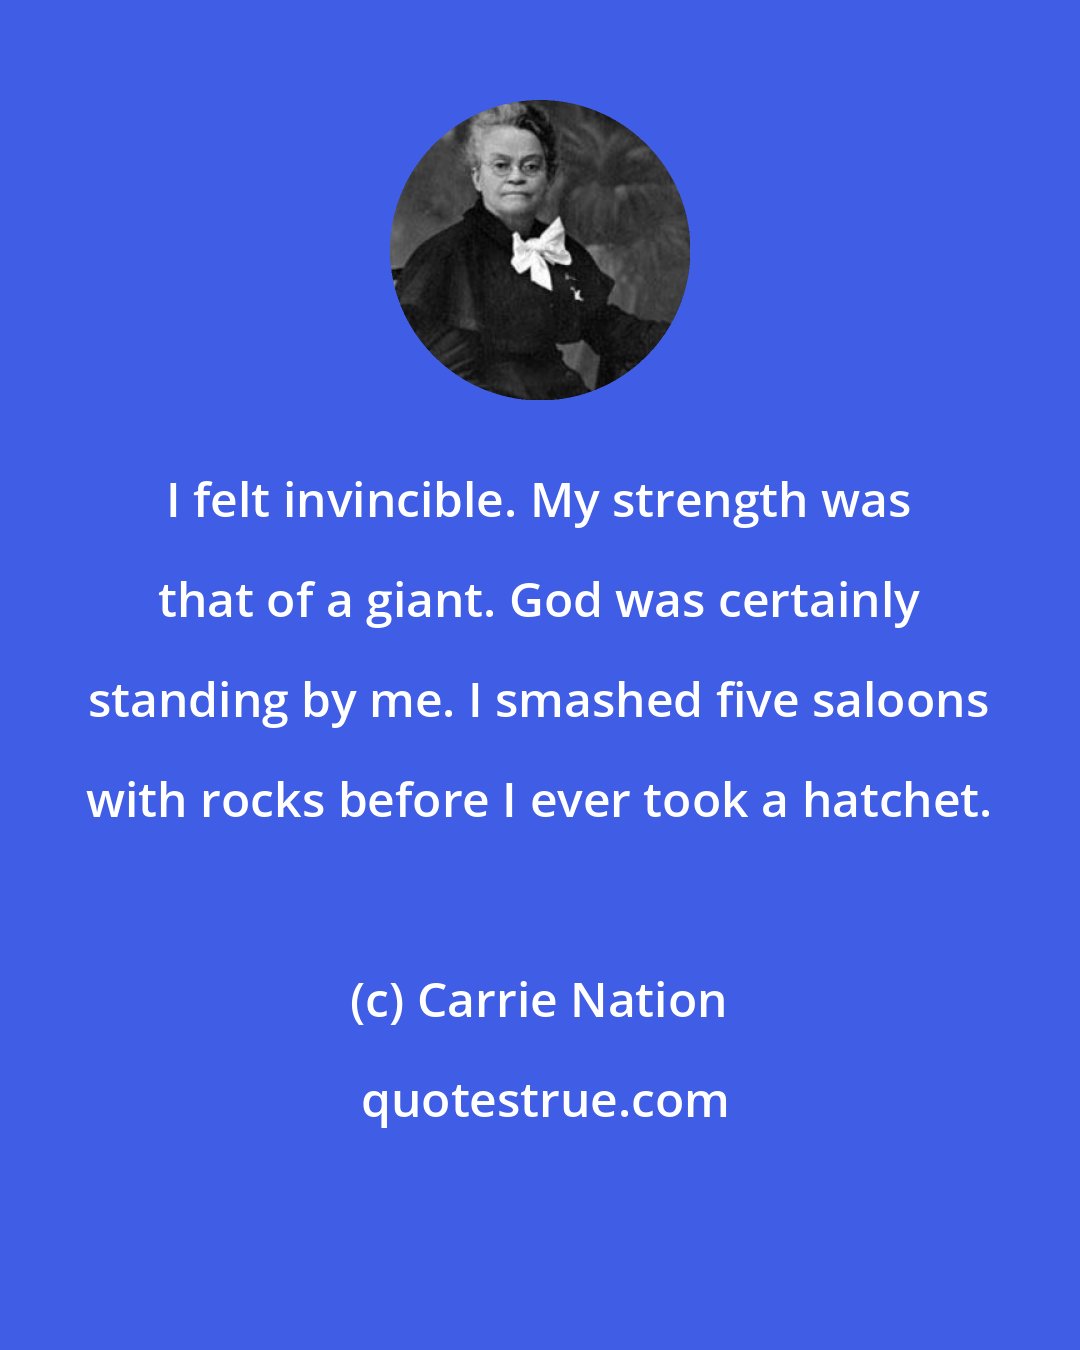 Carrie Nation: I felt invincible. My strength was that of a giant. God was certainly standing by me. I smashed five saloons with rocks before I ever took a hatchet.